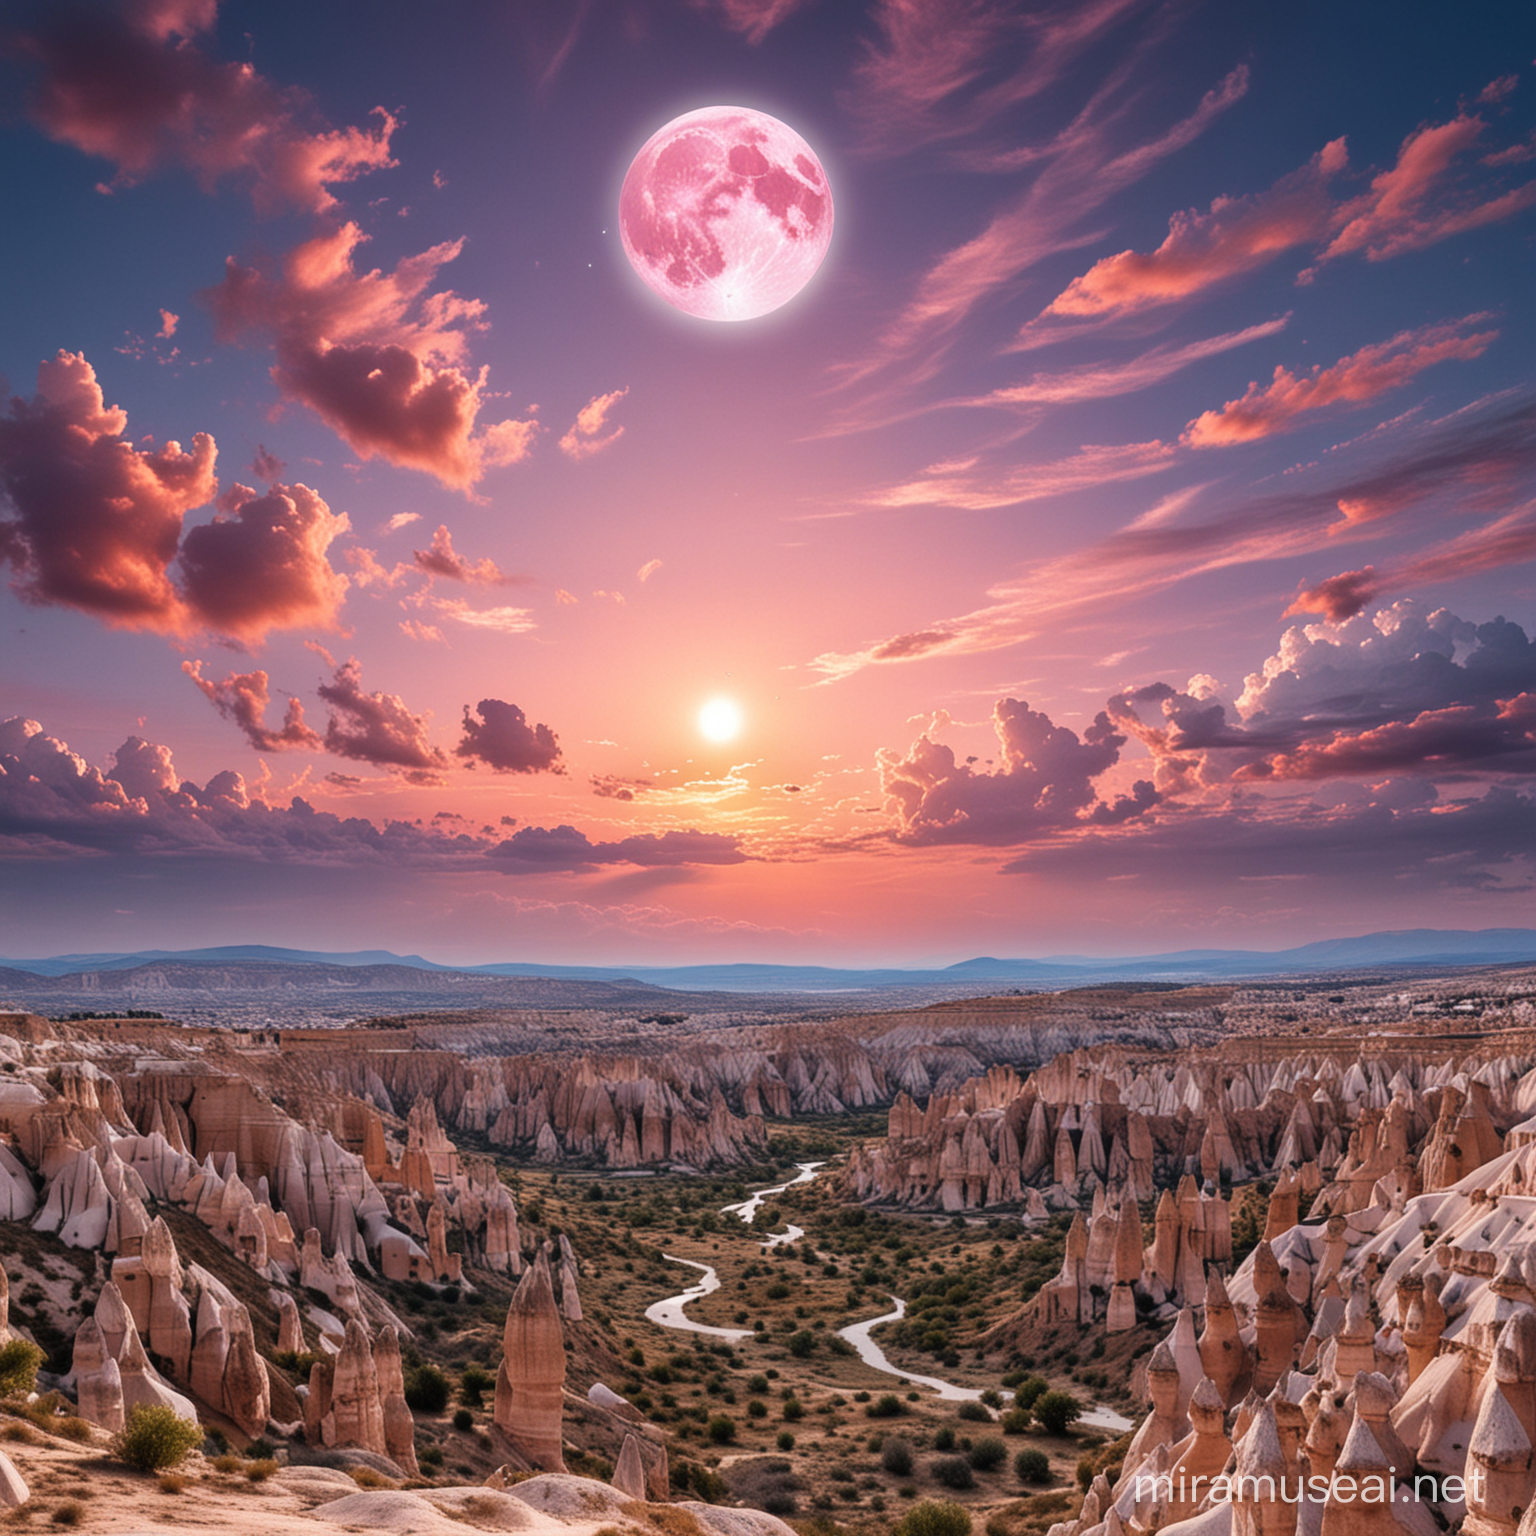 draw a pink-blue sky with clouds at sunset and a large moon in the middle. in the distance there are balls like in Cappadocia
The moon should be in the center. Add more clouds and moon in the centre of the image